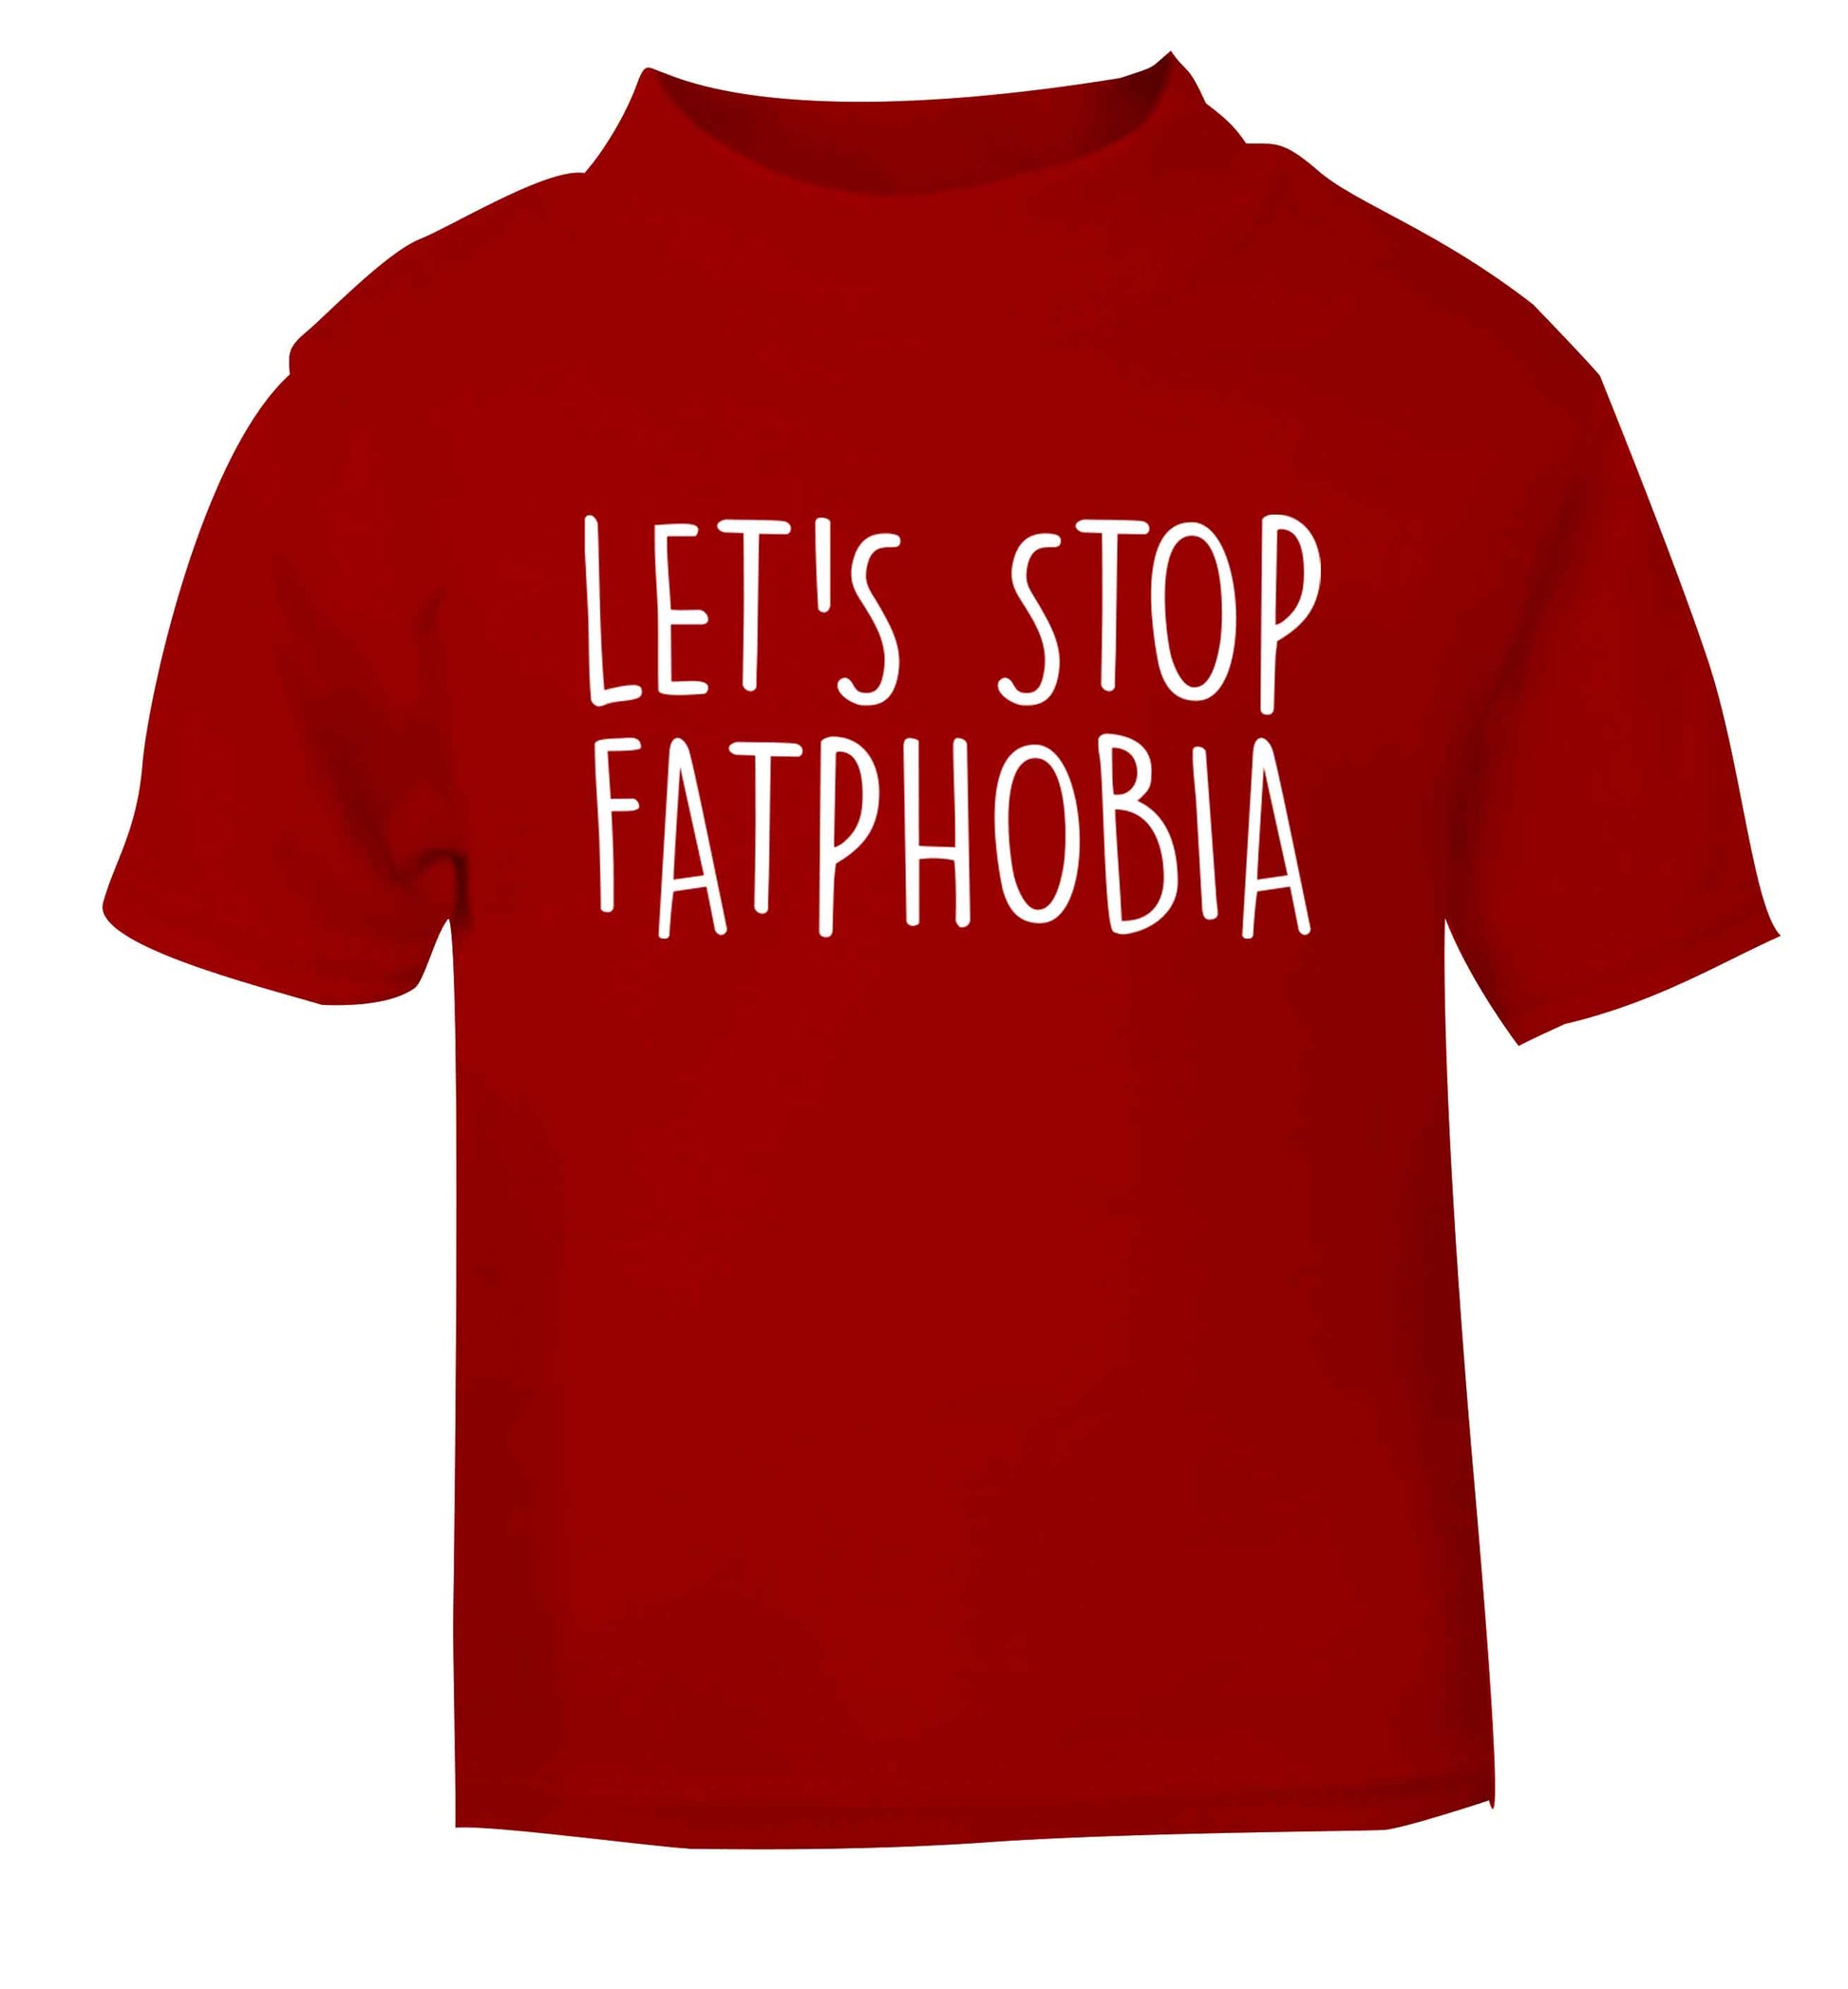 Let's stop fatphobia red baby toddler Tshirt 2 Years